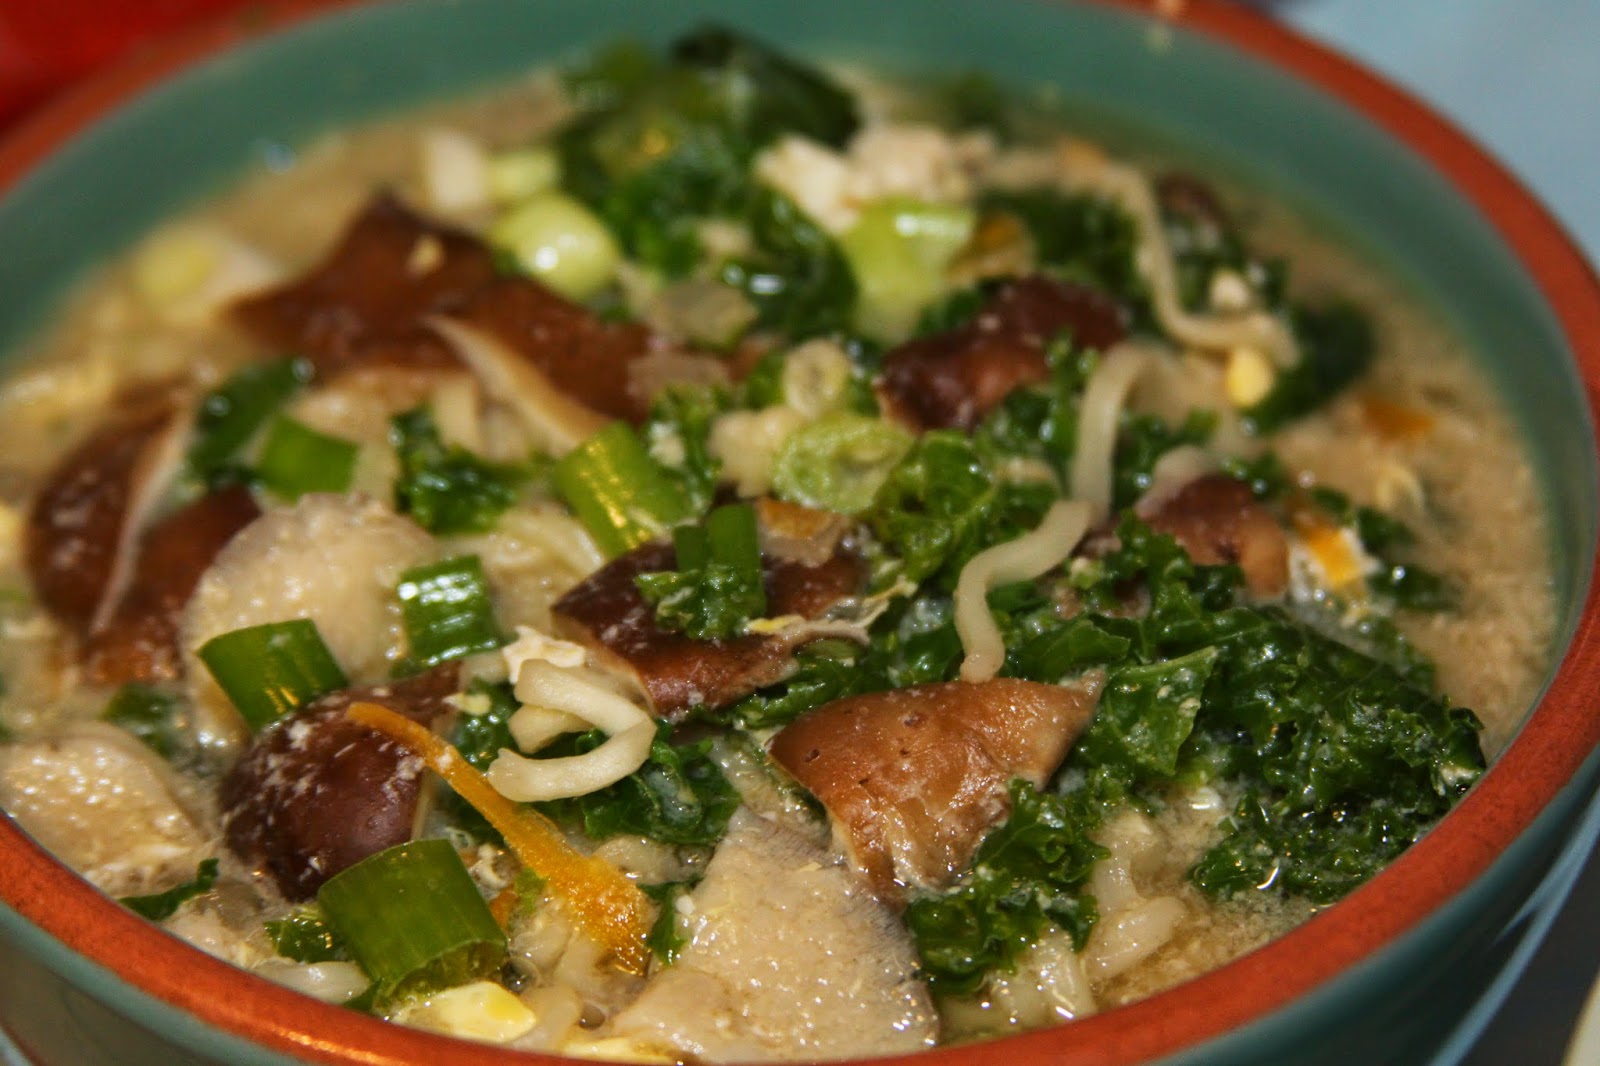 Meatless Monday: Vegetable Ramen Soup - For the Love of Food